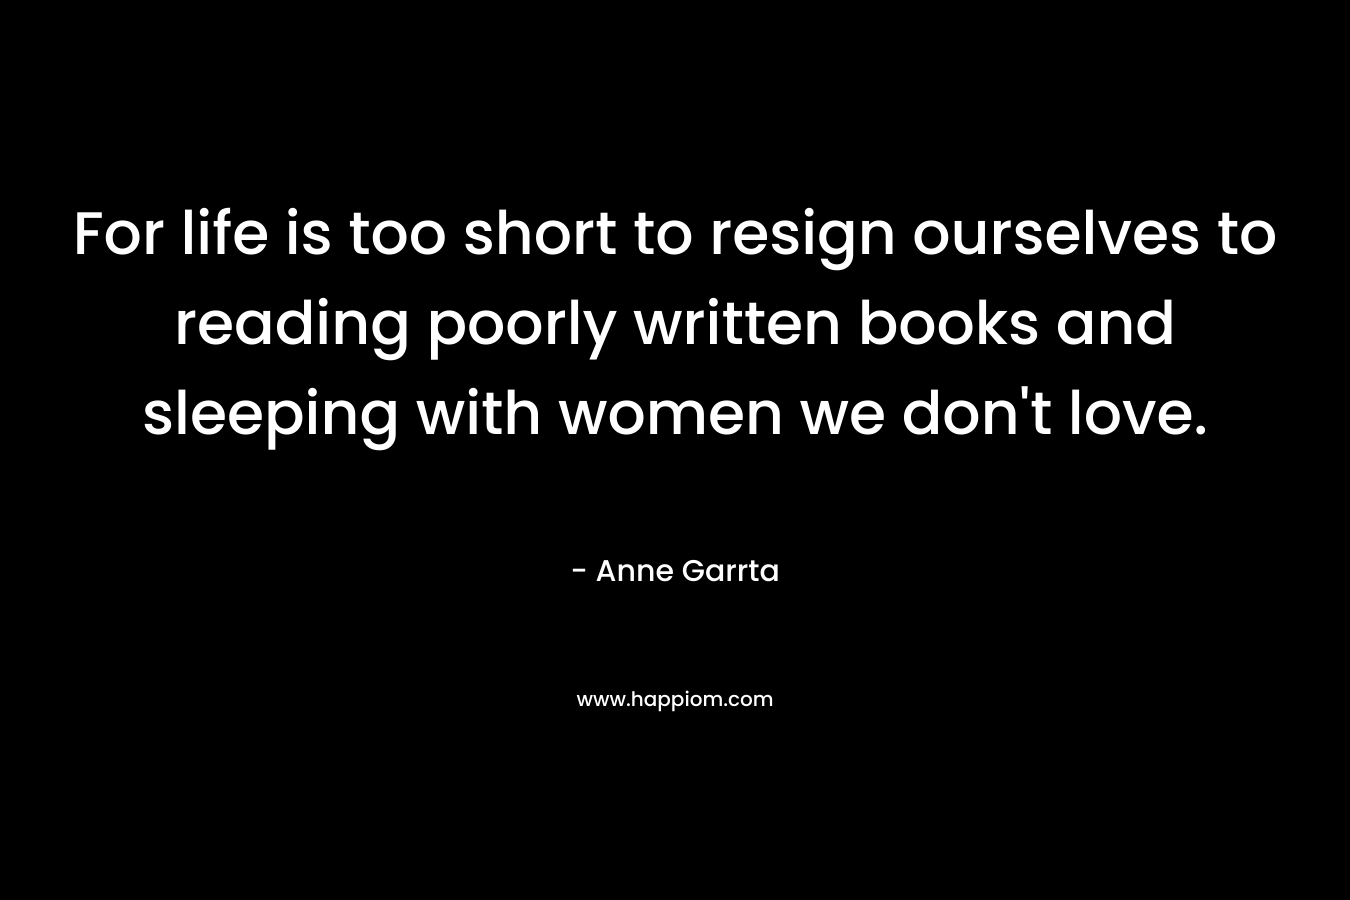 For life is too short to resign ourselves to reading poorly written books and sleeping with women we don’t love. – Anne Garrta